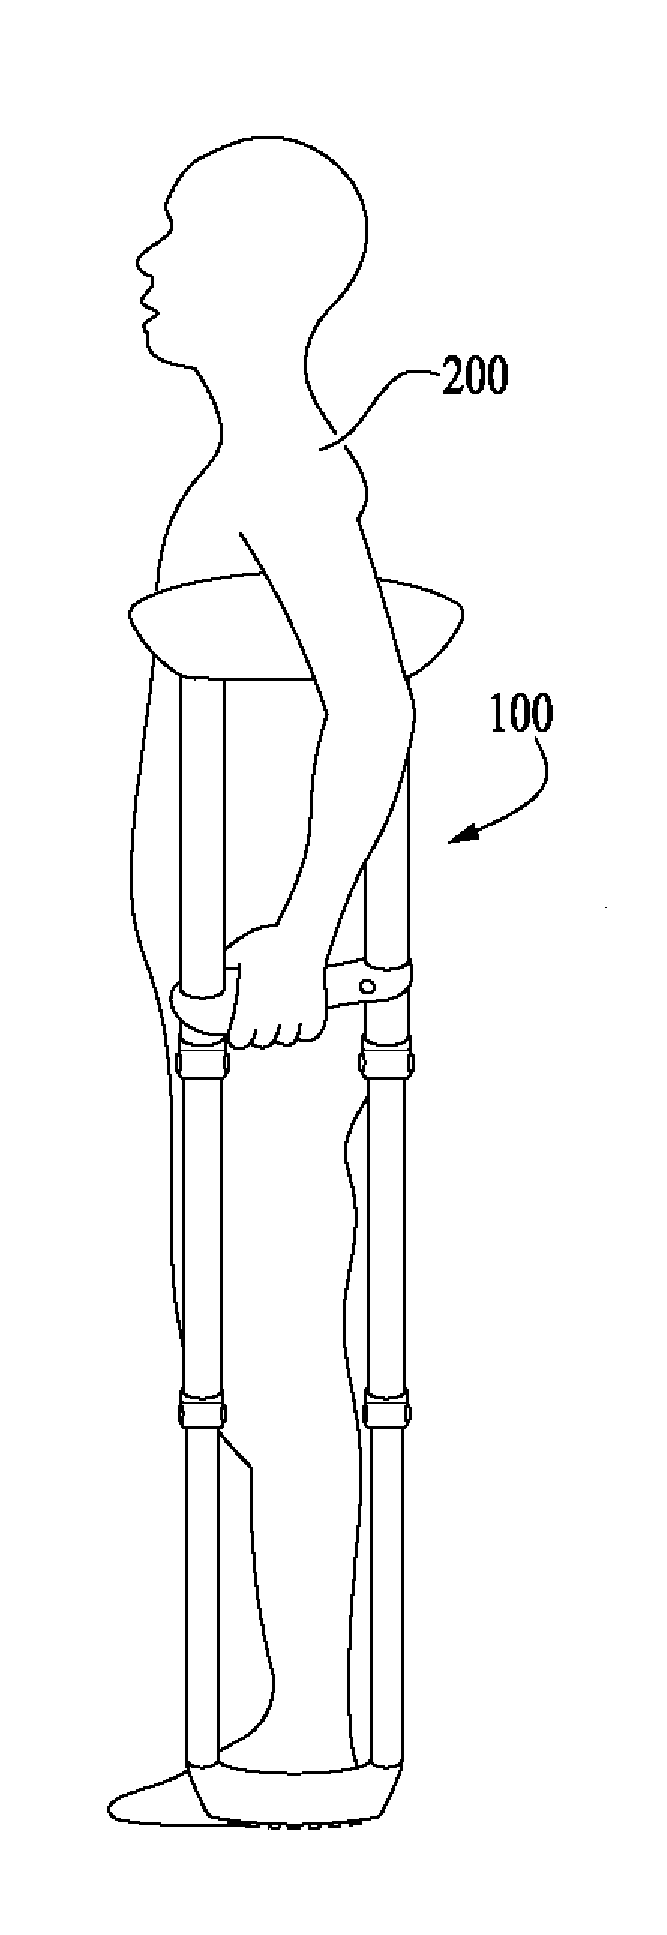 Crutch and Sitting Device